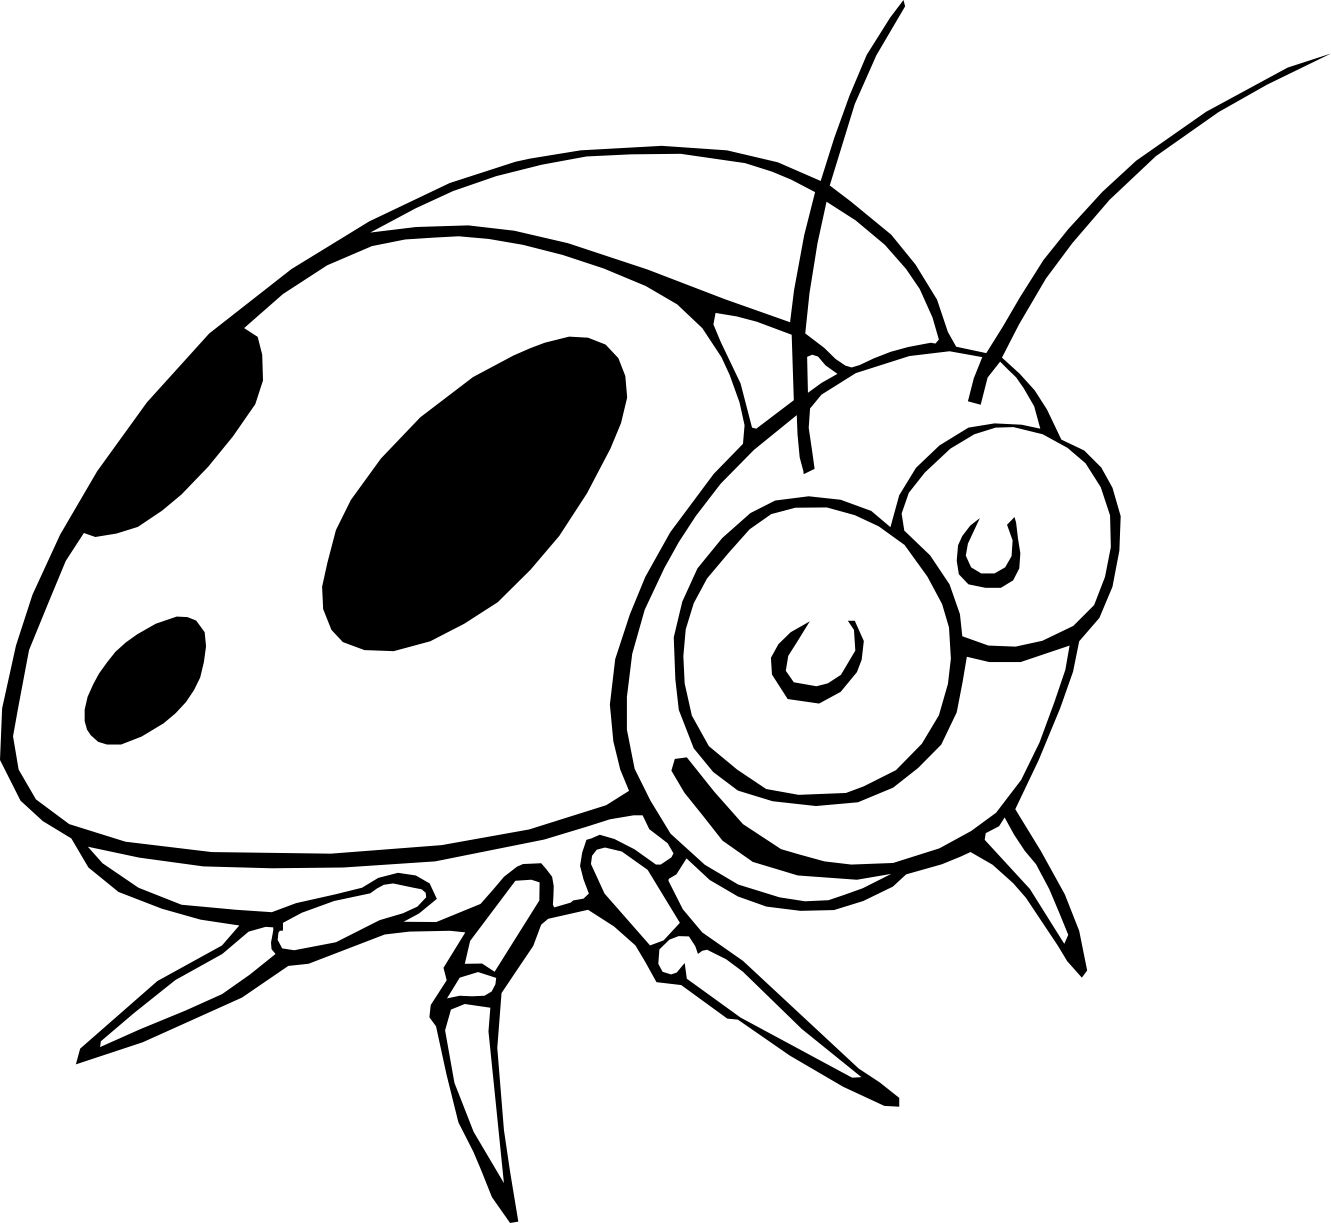 Ladybug Clipart Black And White - Free Clipart Images